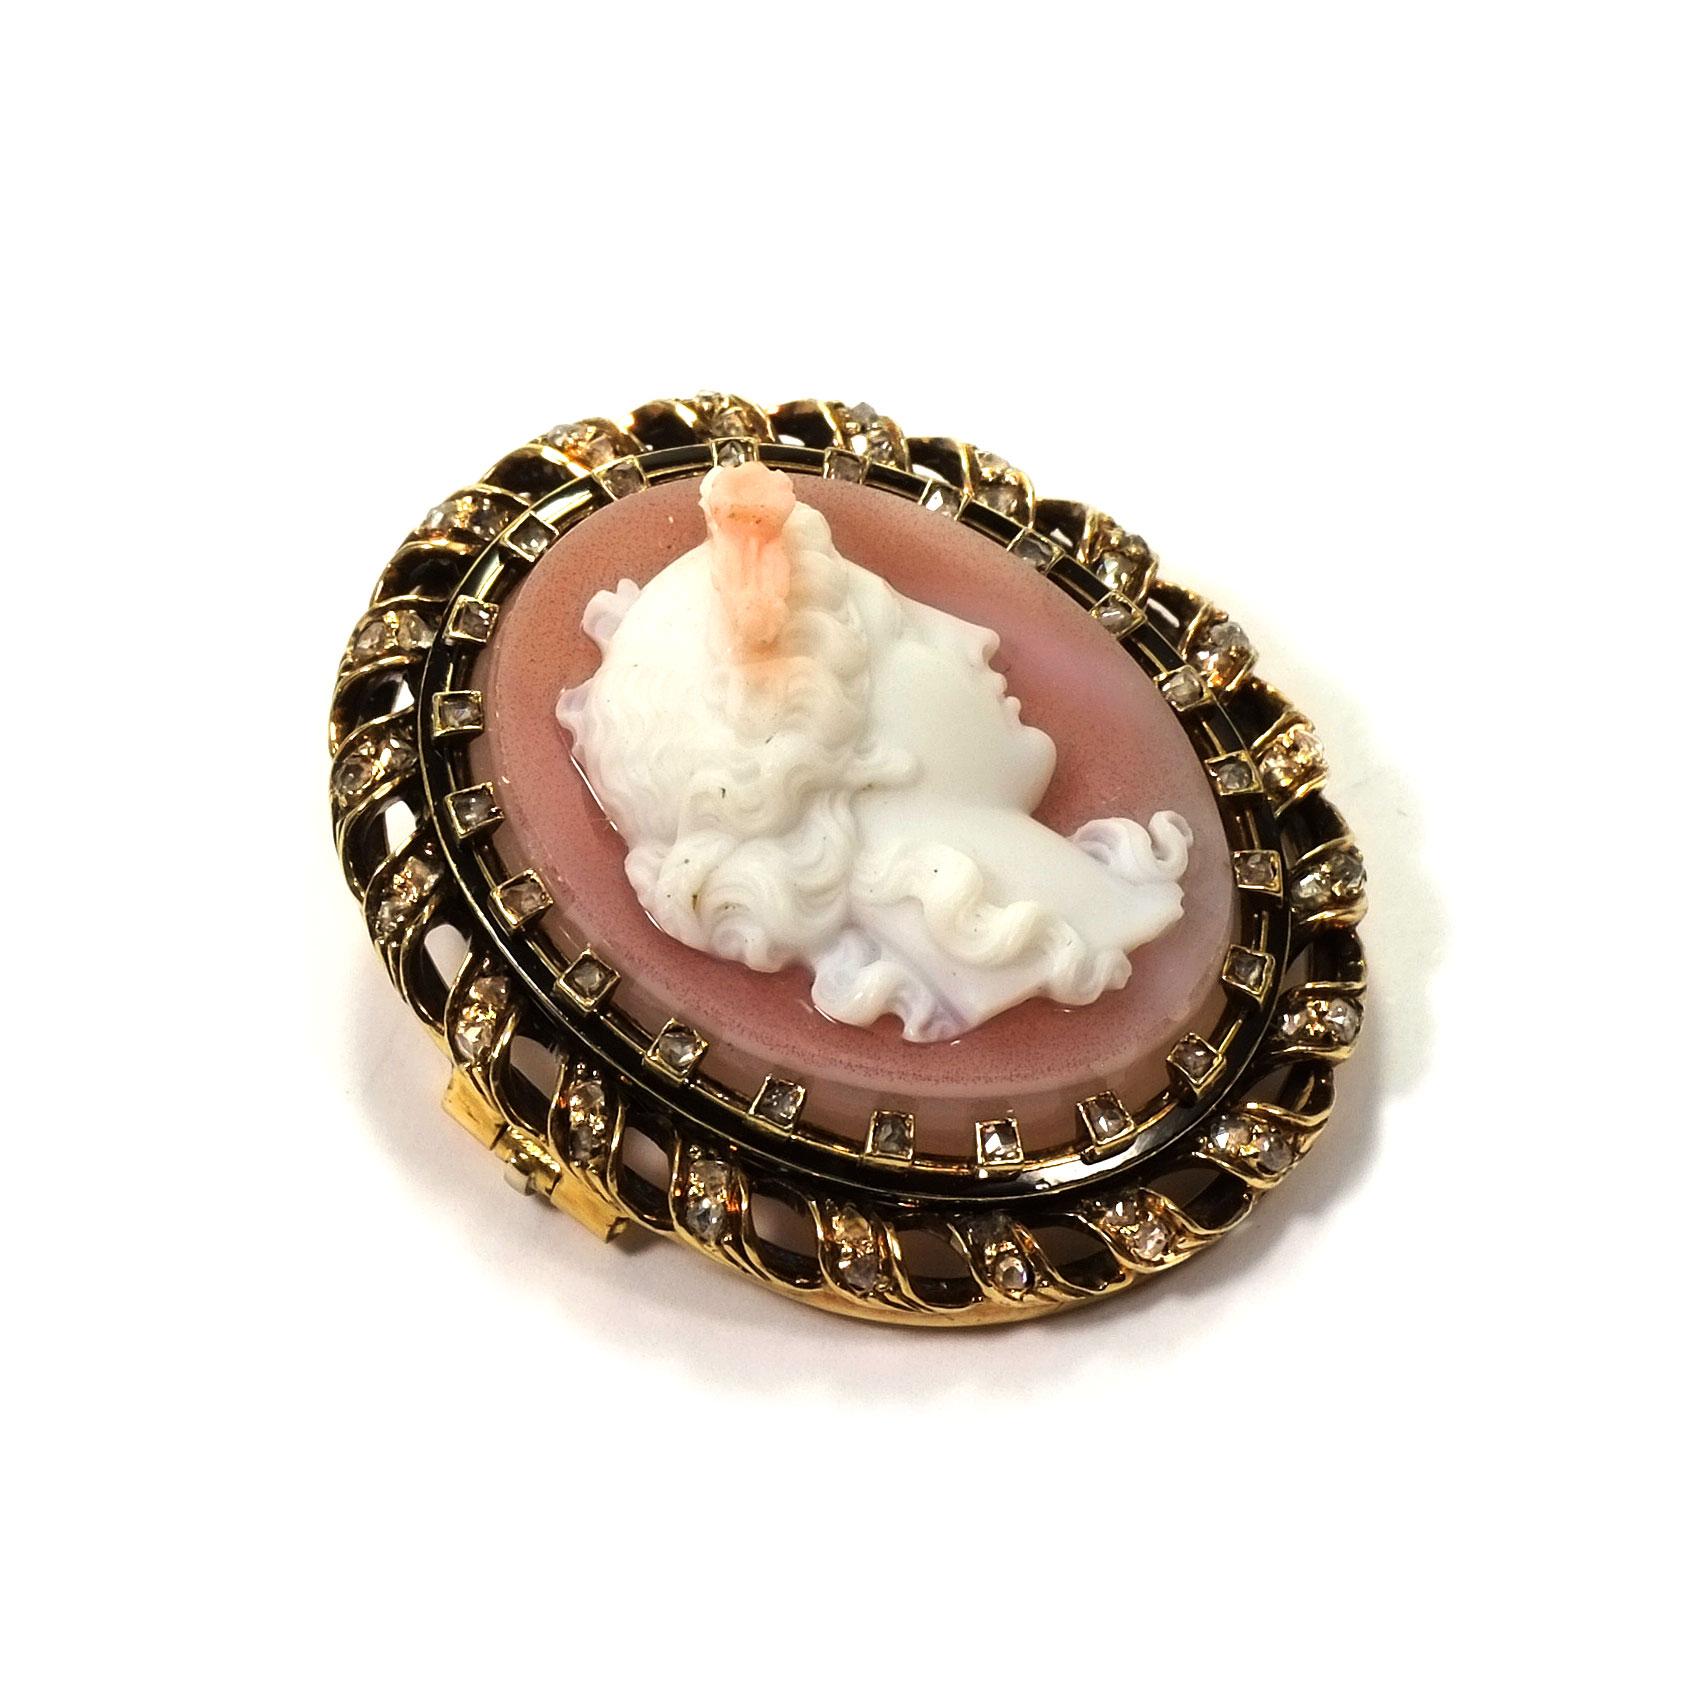 French antique Agate cameo diamond and enamel gold Brooch circa 1870

This brooch set with a finely carved rose-colored Agate cameo depicting the roman goddess Flora, surrounded by a garland of rose cut diamonds in an elaborately worked gold frame,